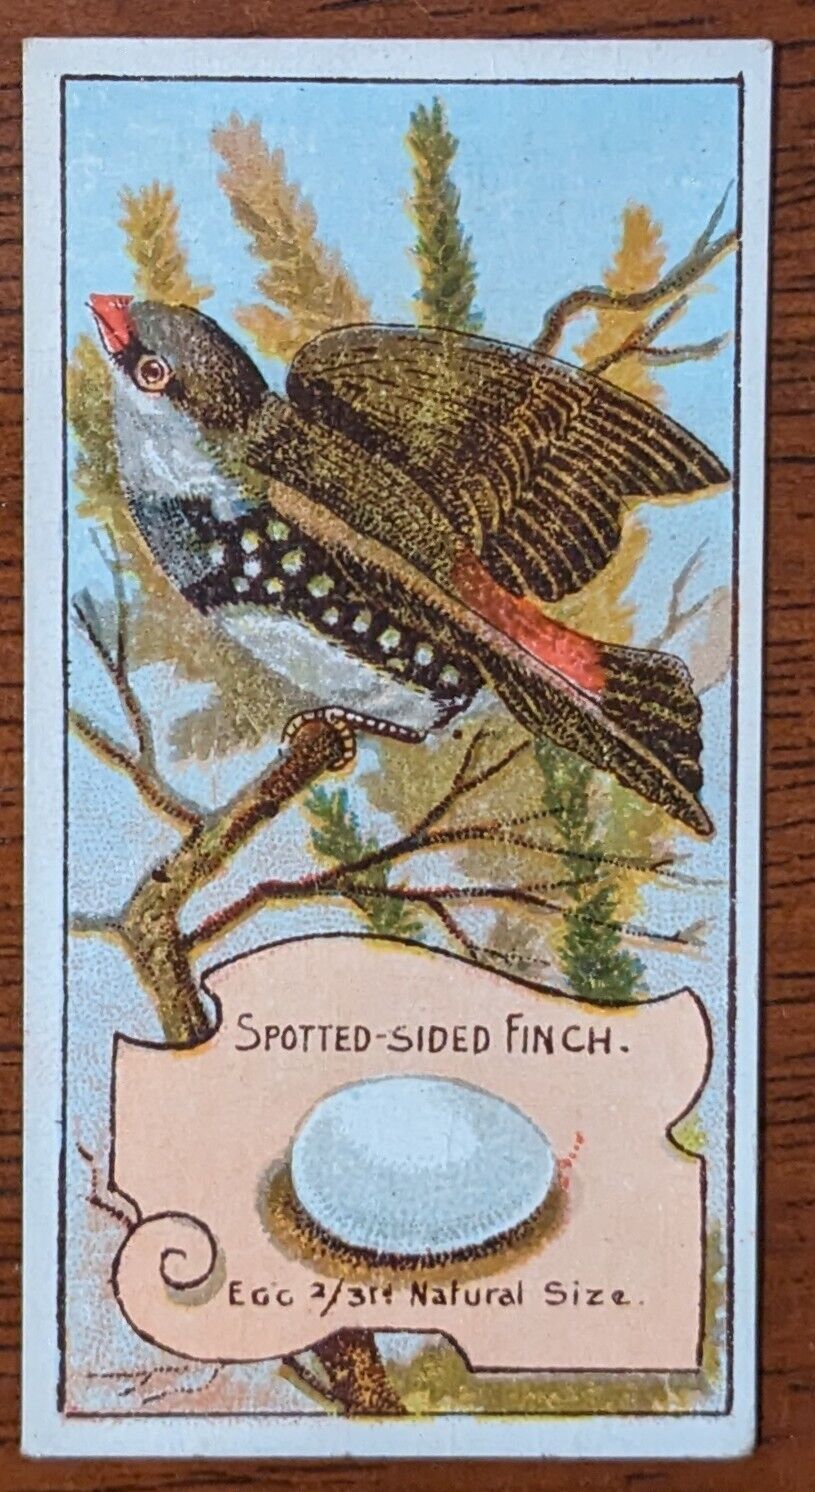 1912 Wills Vice Regal Birds of Australasia Cigarette Card - Spotted Sided Finch